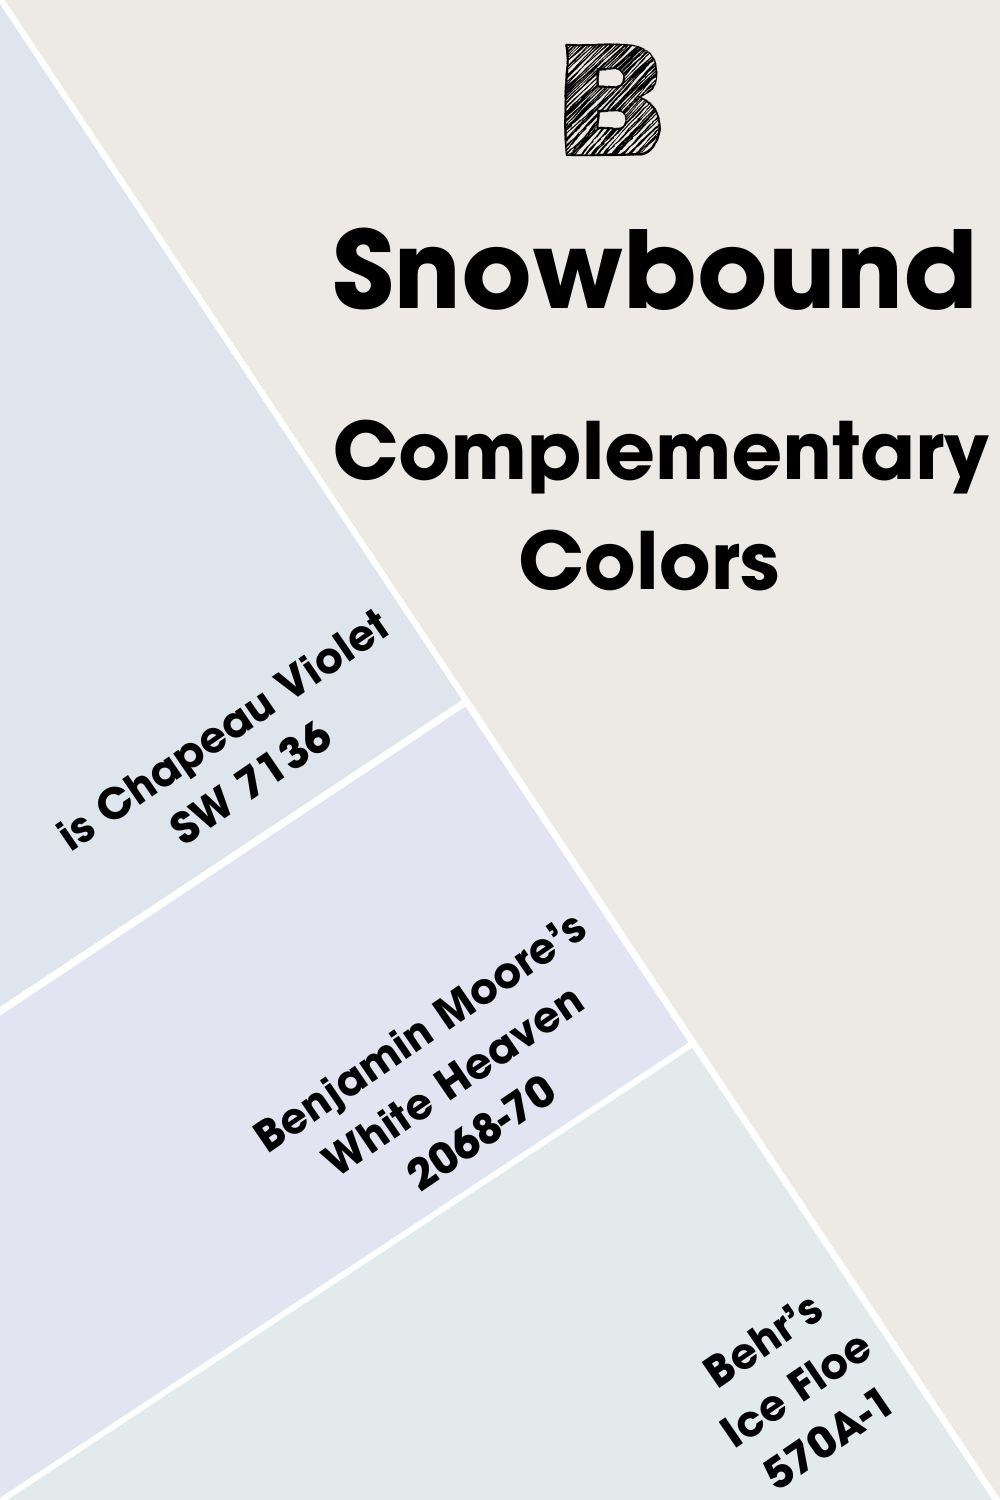 Snowbound Complementary Colors 